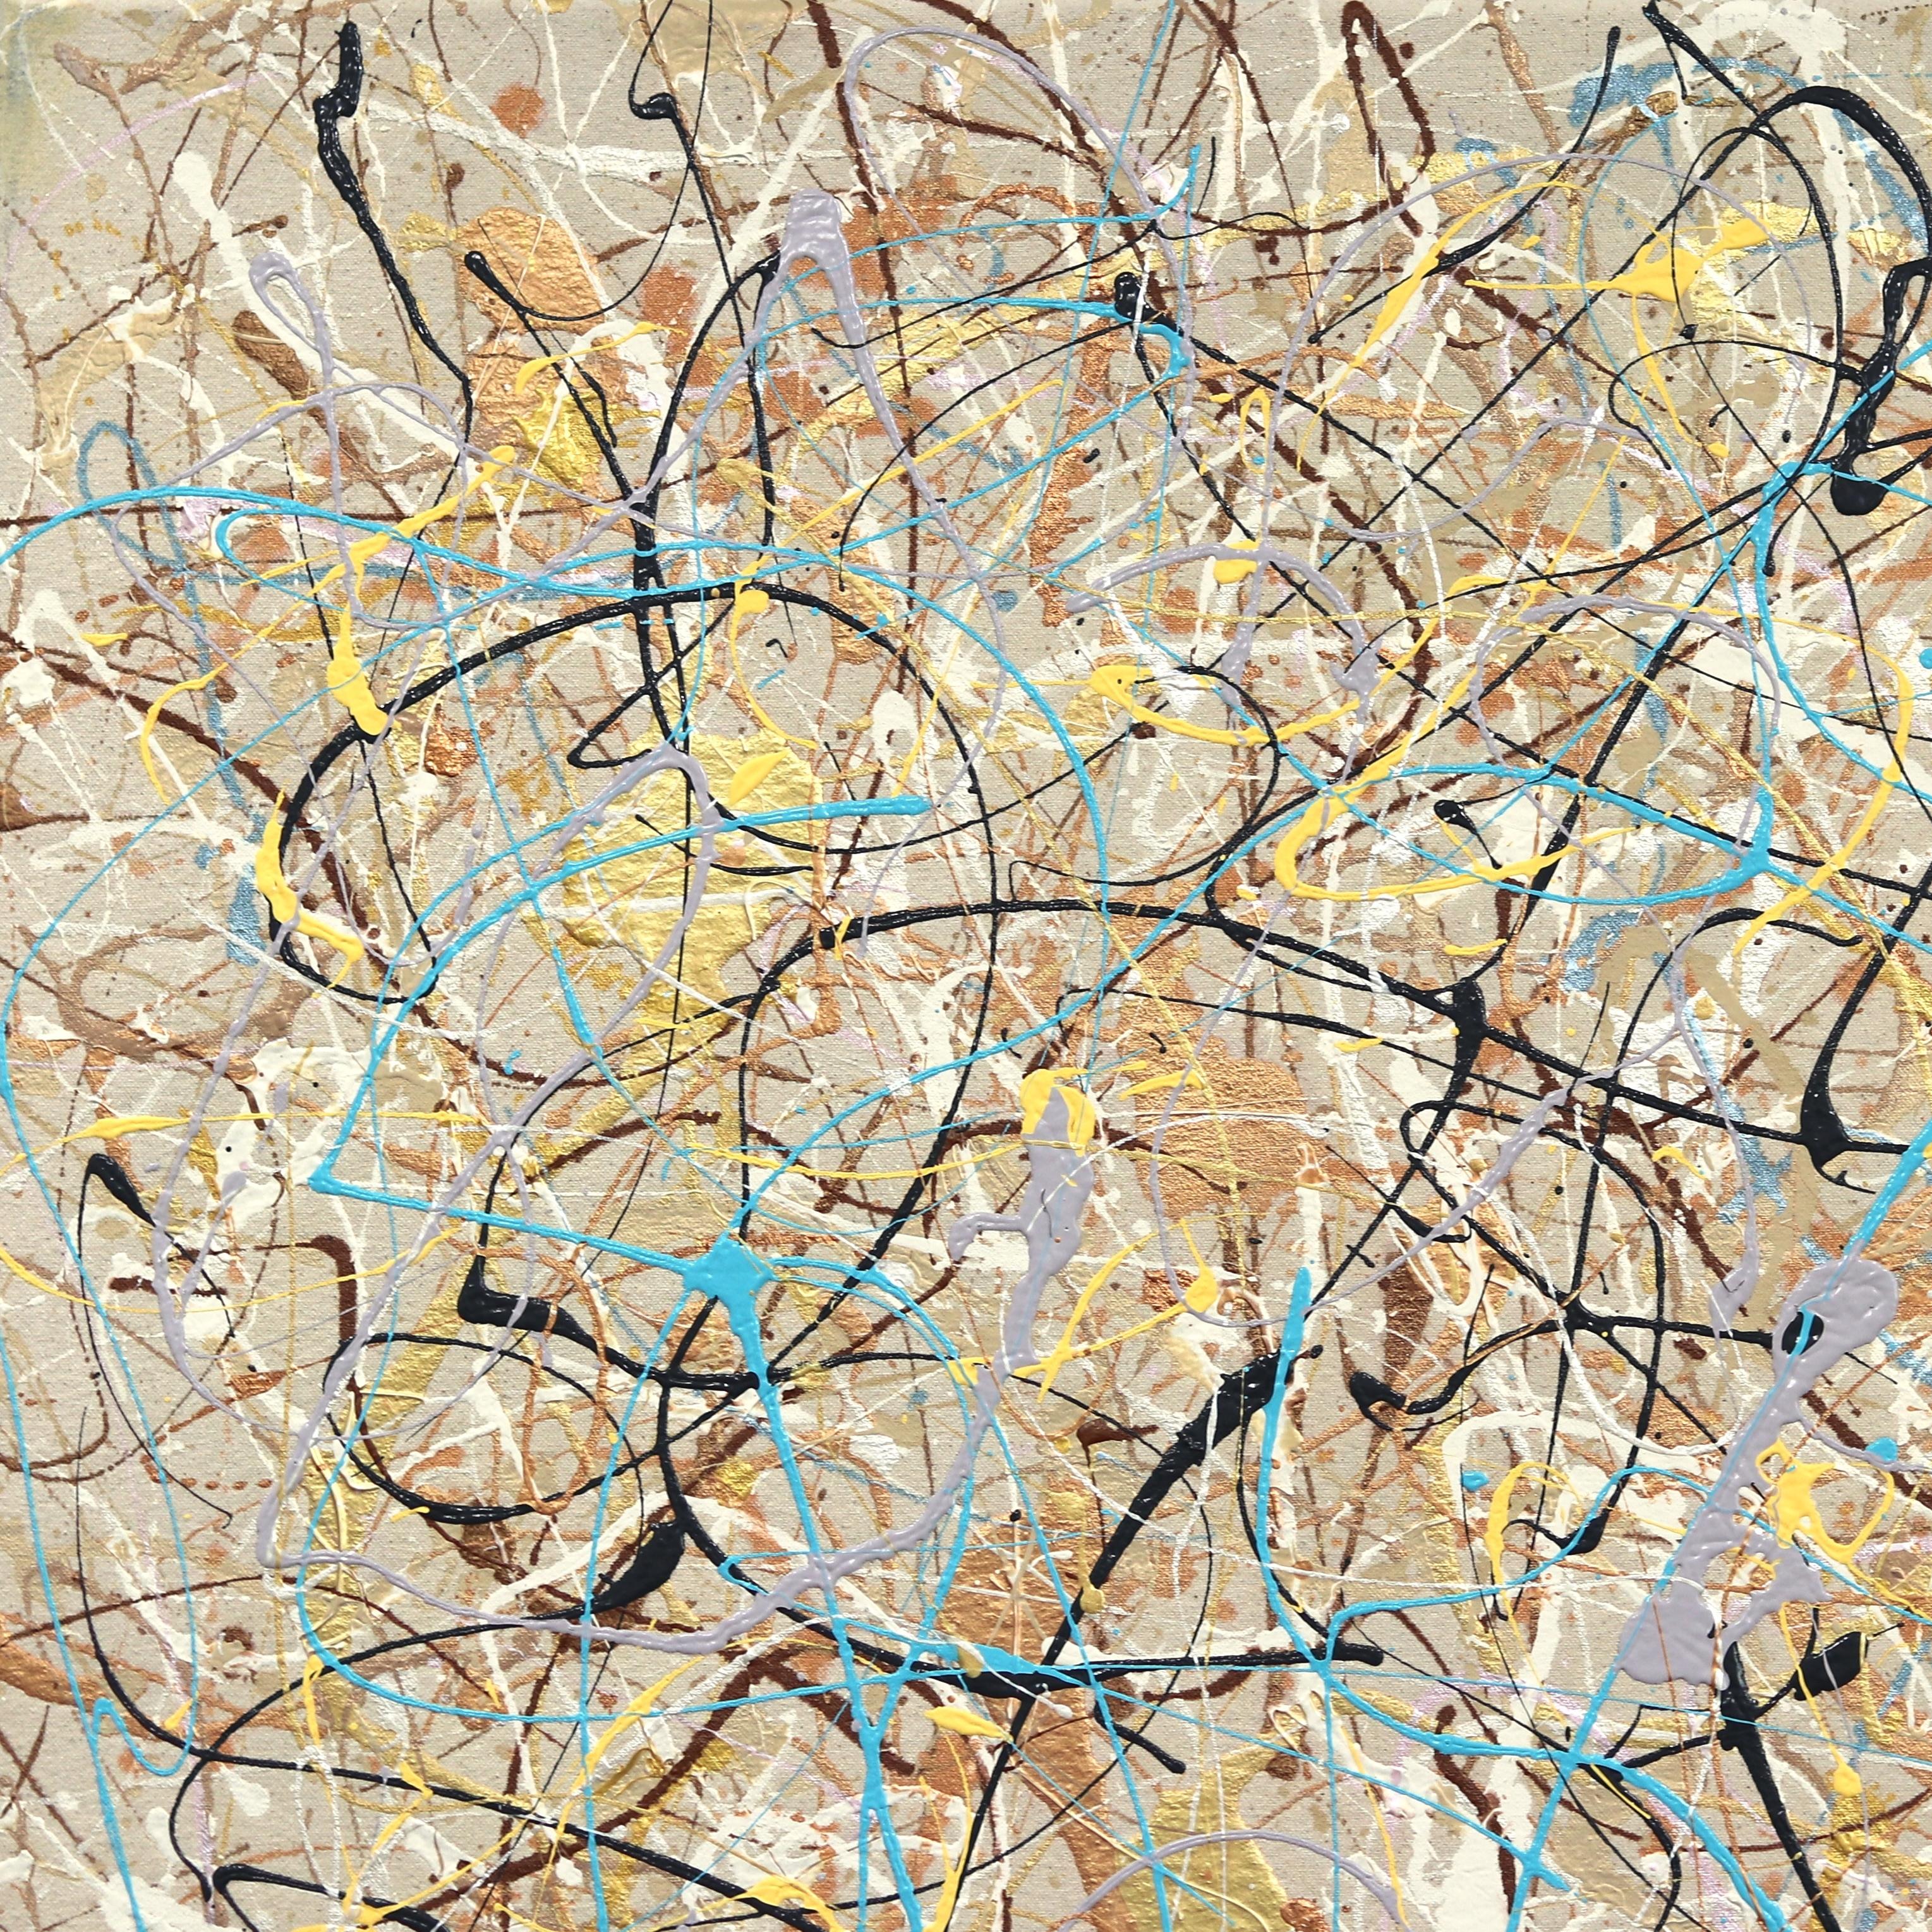 Los Angeles artist Marc Raphael captivates by his abstract expressionism paintings influenced by New York's abstract expressionist movement. After encountering Jackson Pollock’s work for the first time in the 90s, Raphael was enraptured by the